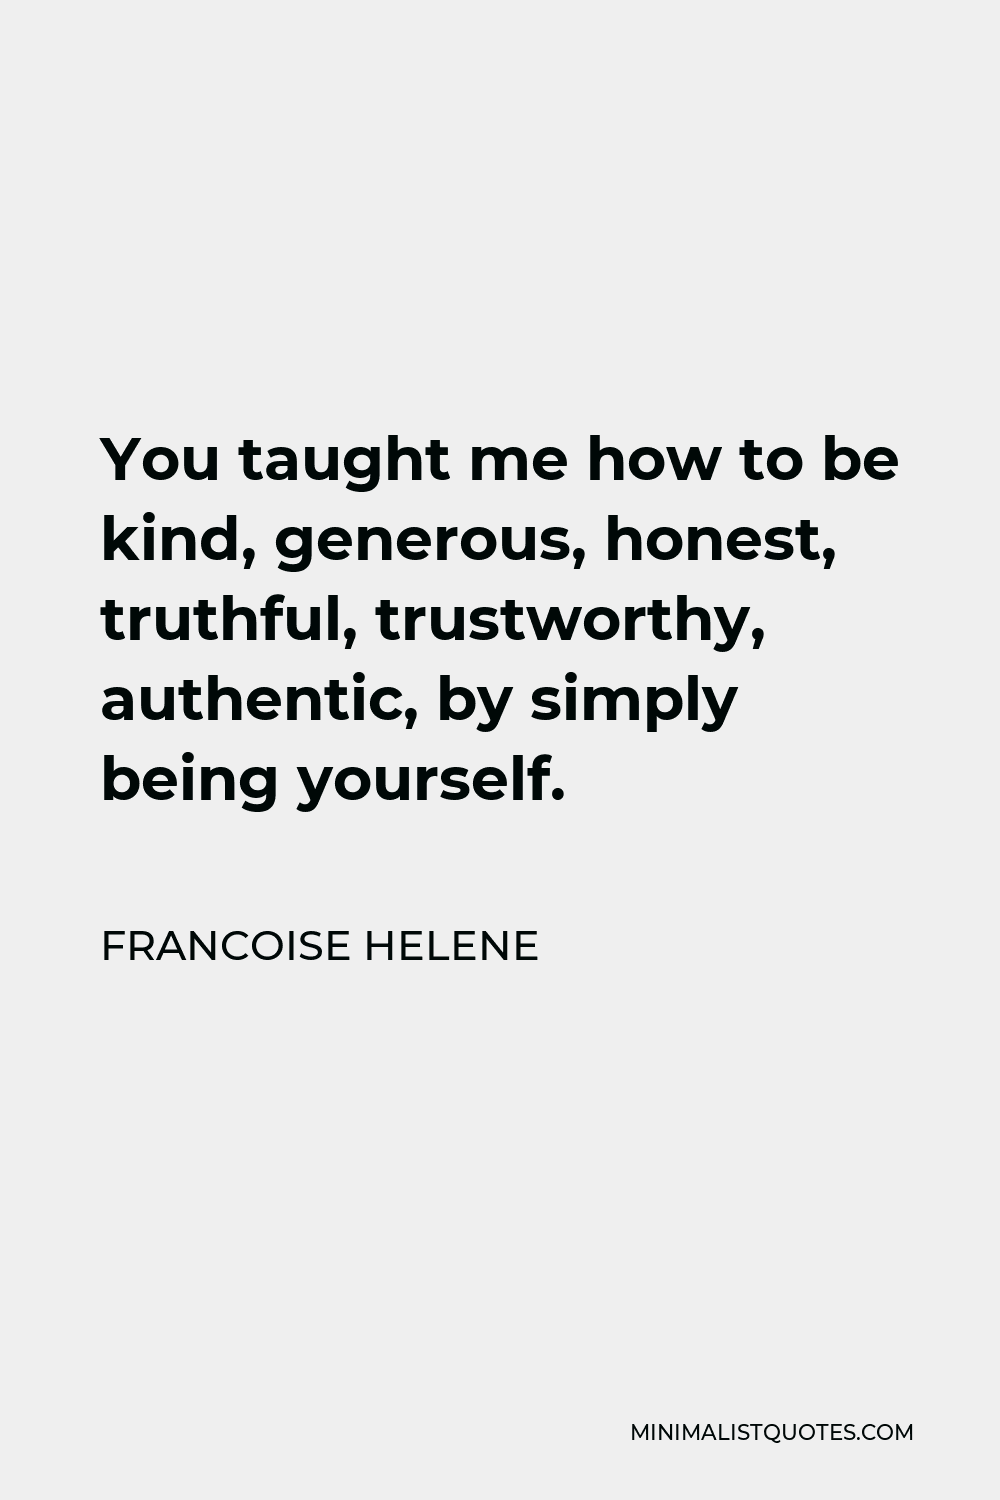 Francoise Helene Quote - You taught me how to be kind, generous, honest, truthful, trustworthy, authentic, by simply being yourself.